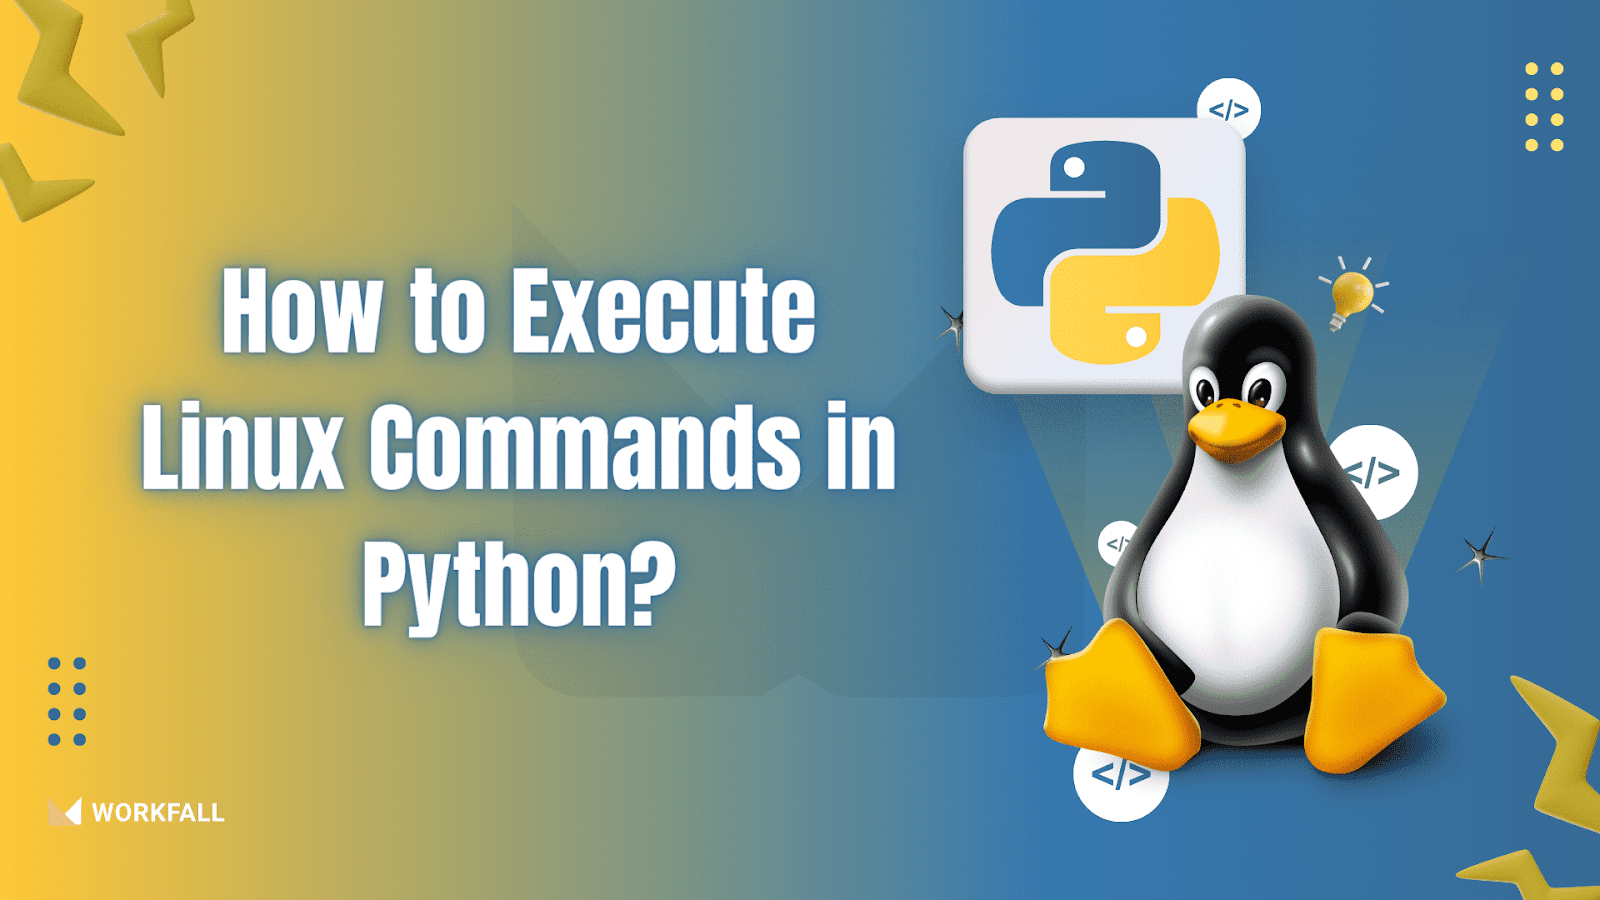 How to Execute Linux Commands in Python?